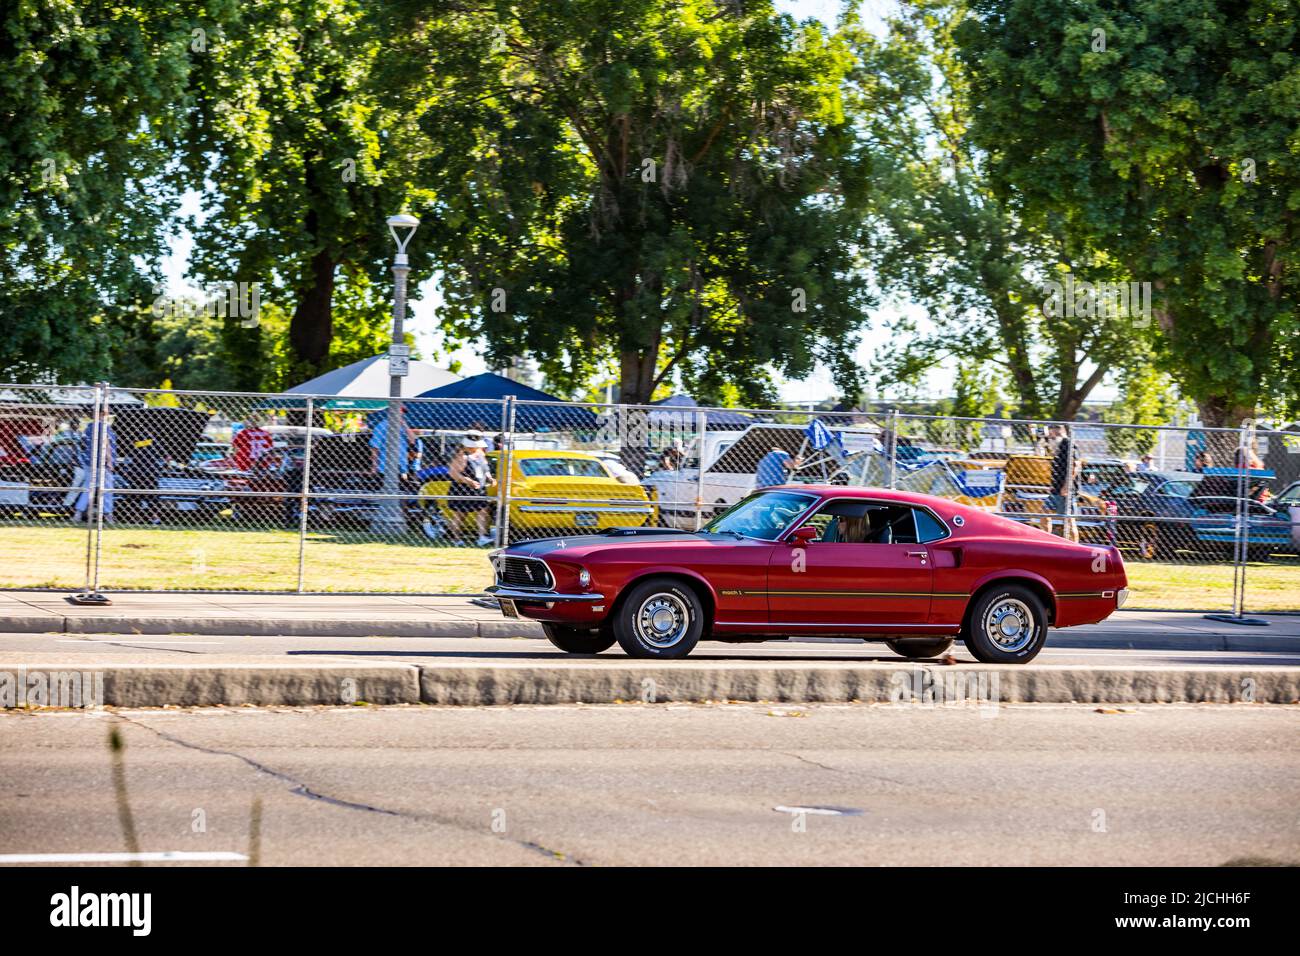 A 1969 Ford Mustang Fastback at the American Graffiti charity Car Show at the Modesto Junior College campus June 11-12 2022 Stock Photo